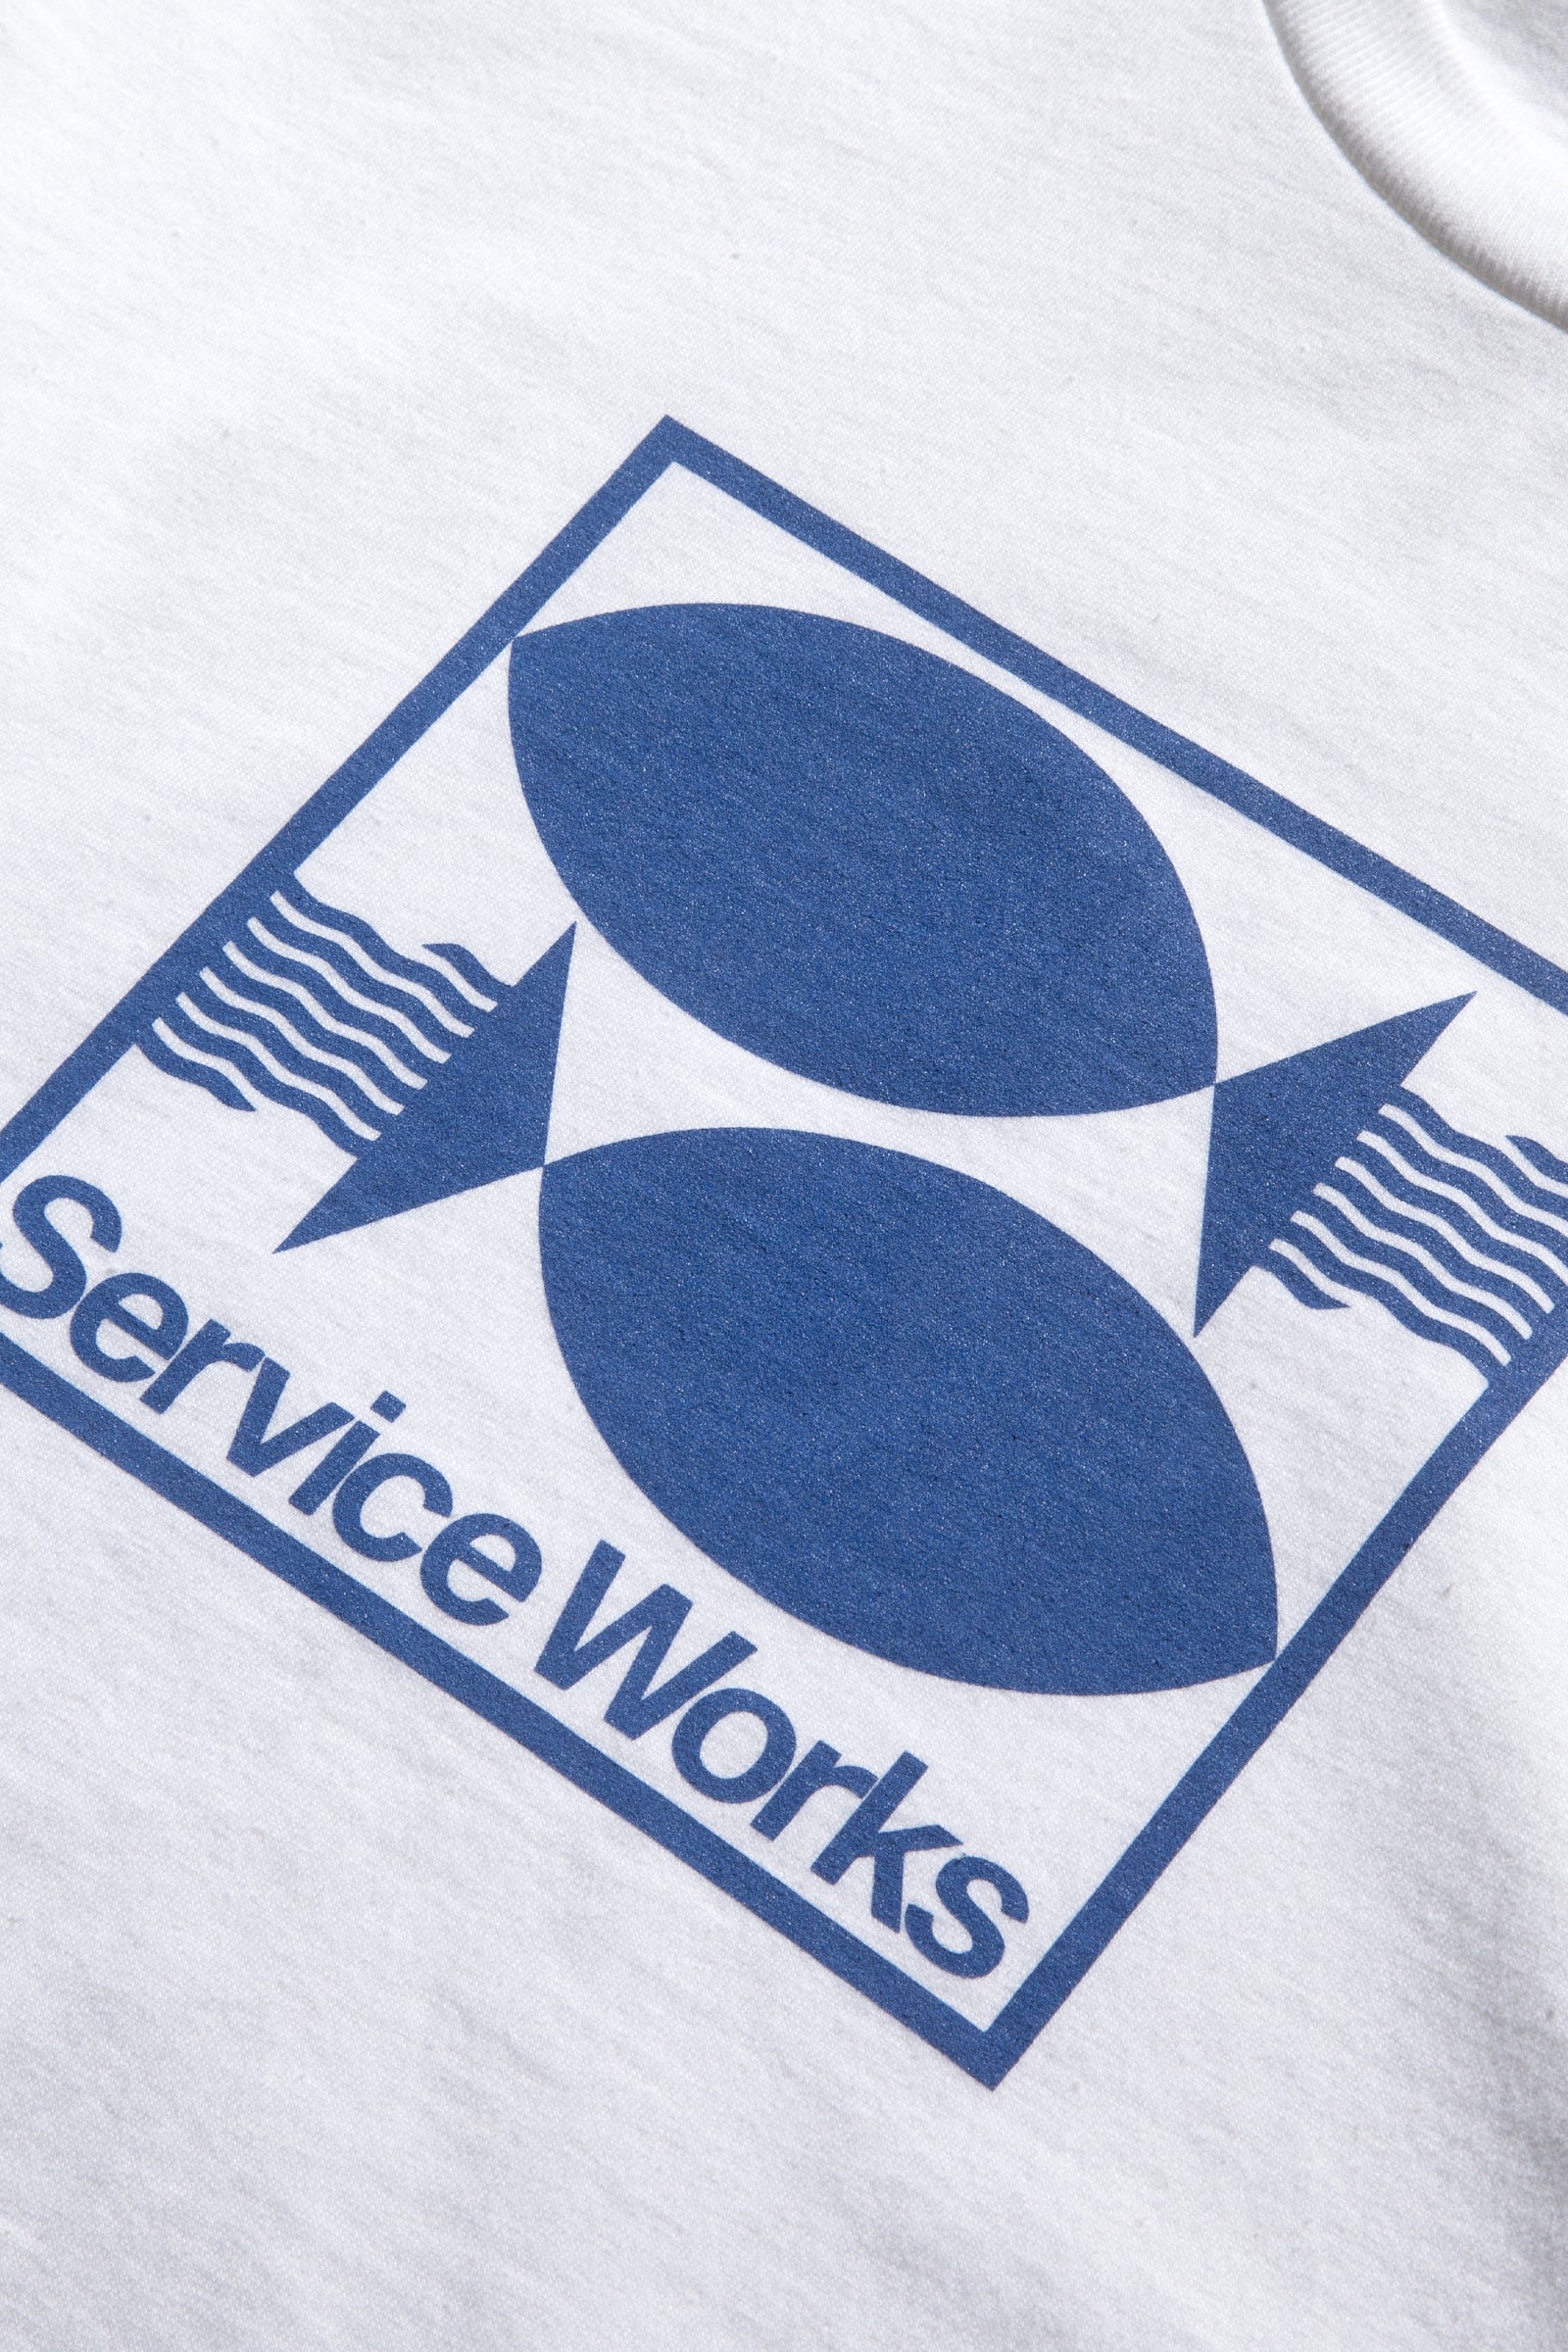 Service Works - Turbot Tee - White